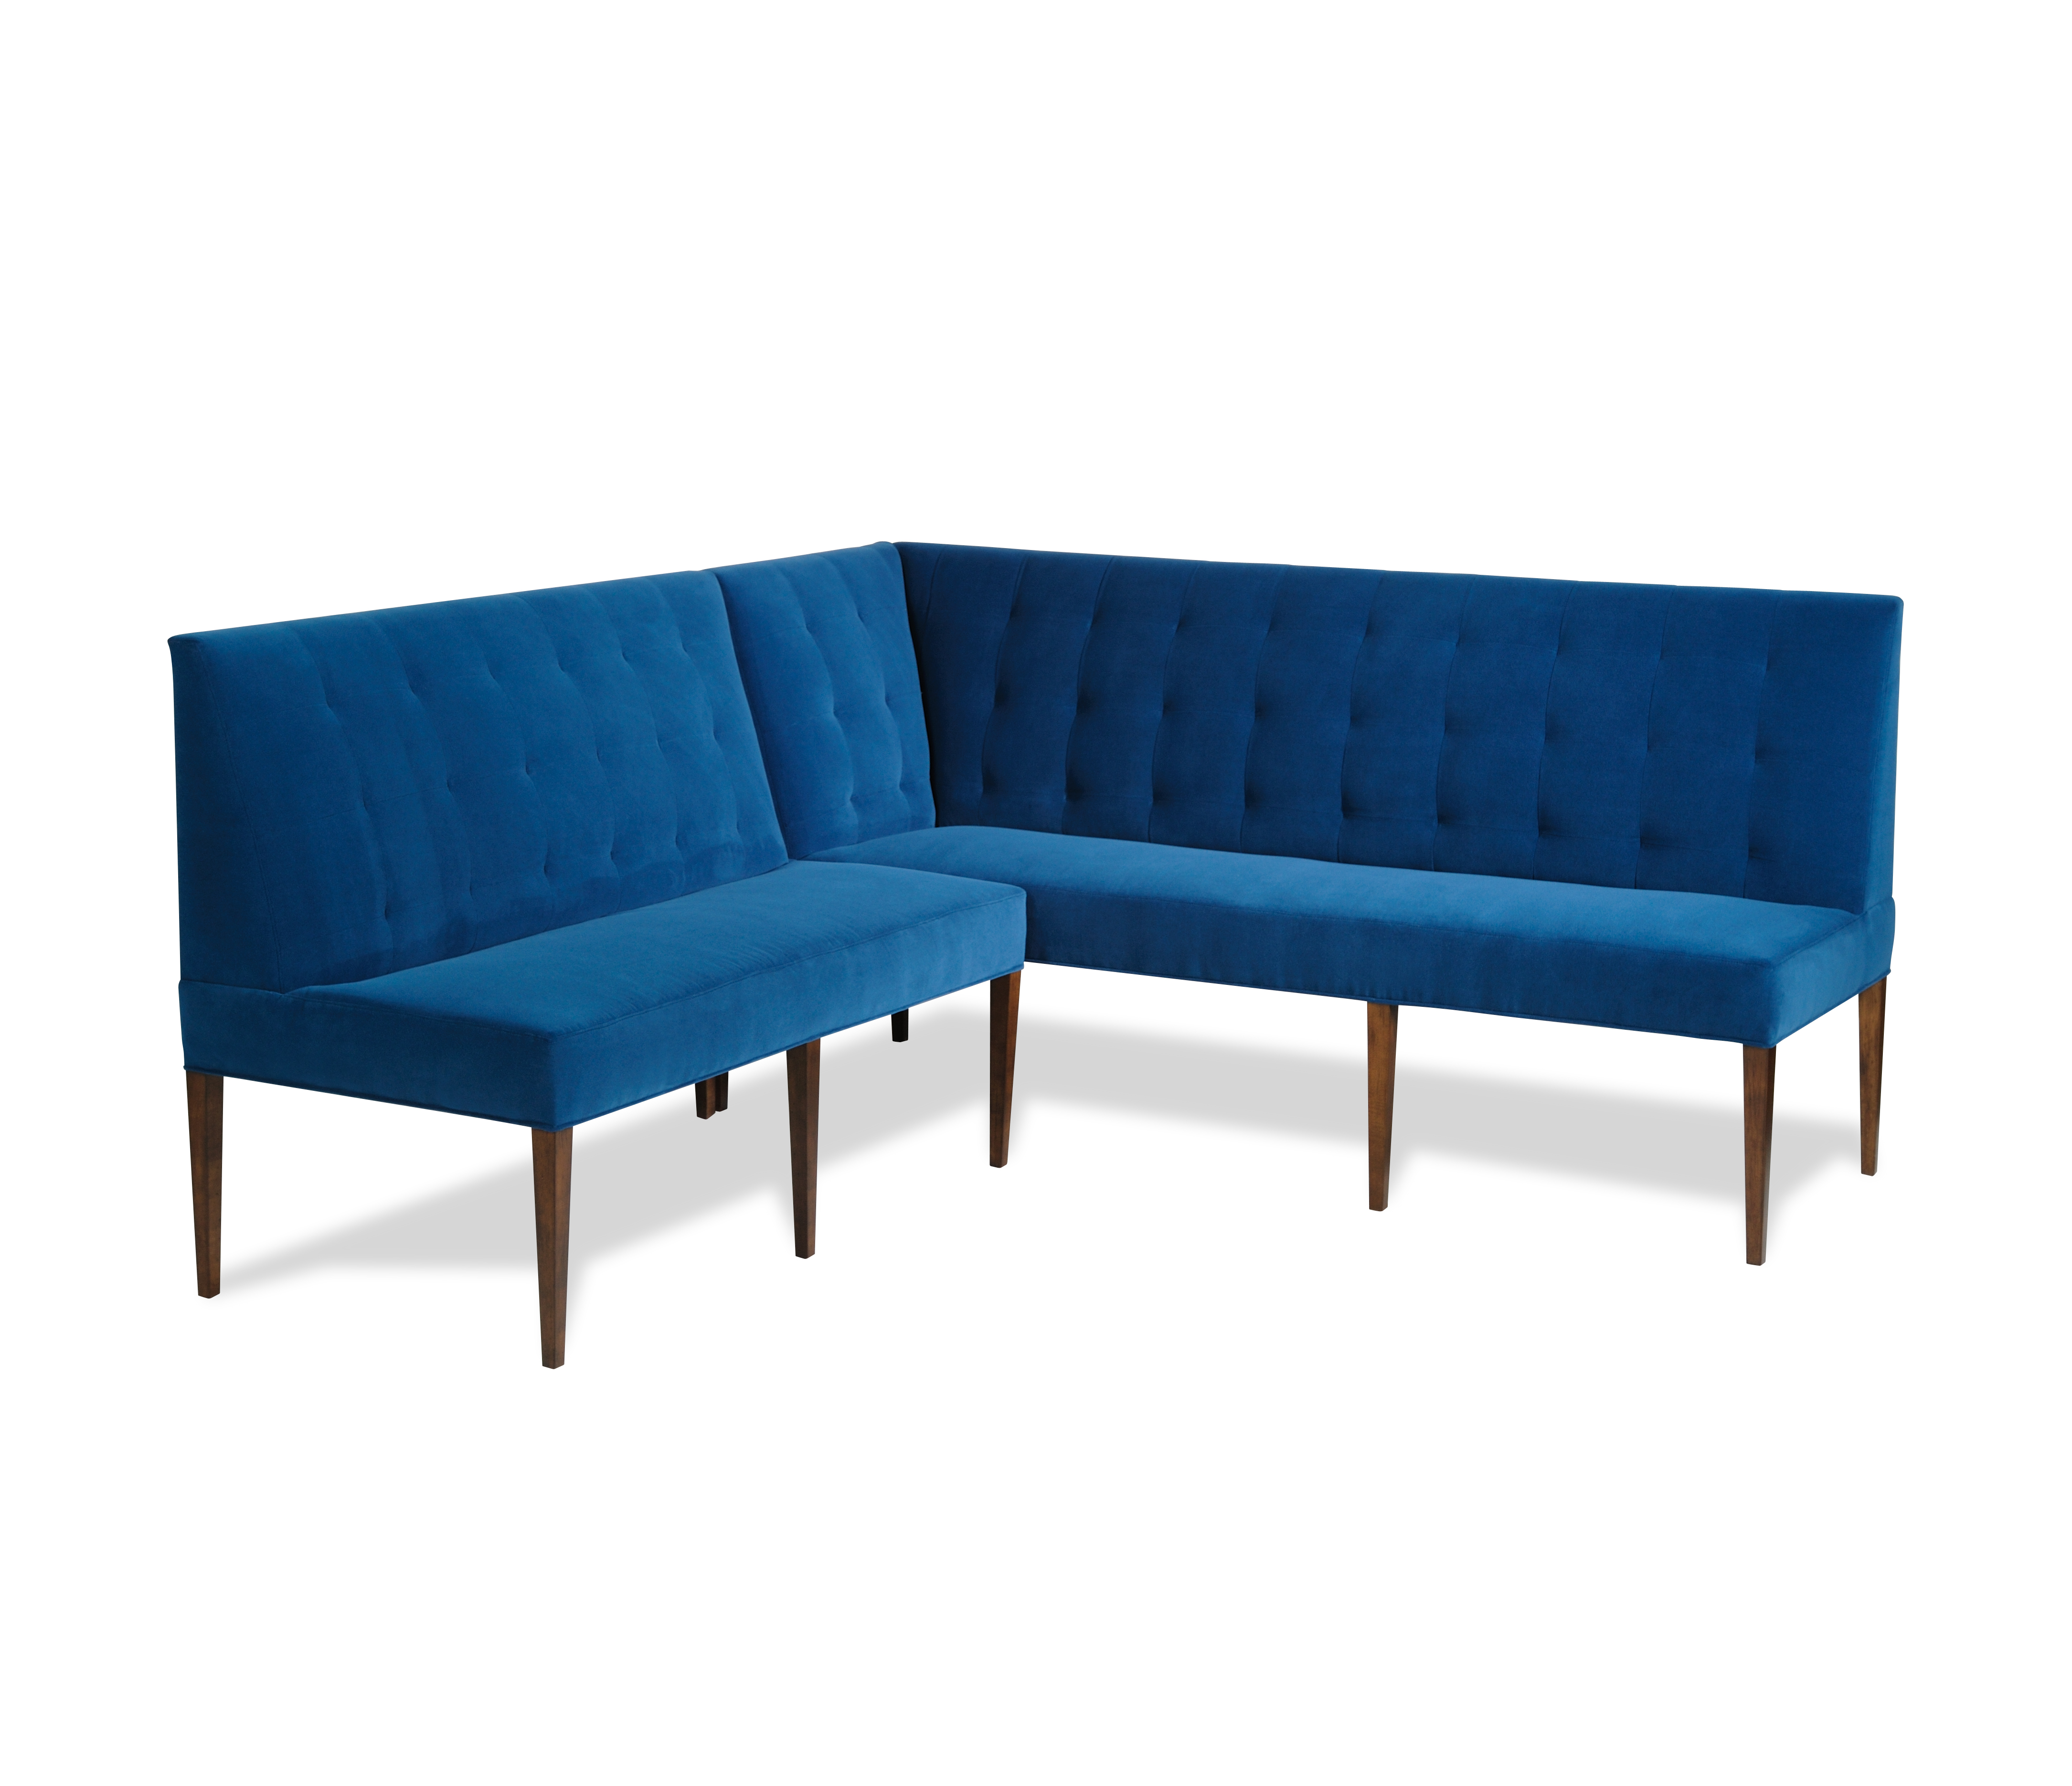 Taylor King Taylor Made dining sectional banquette